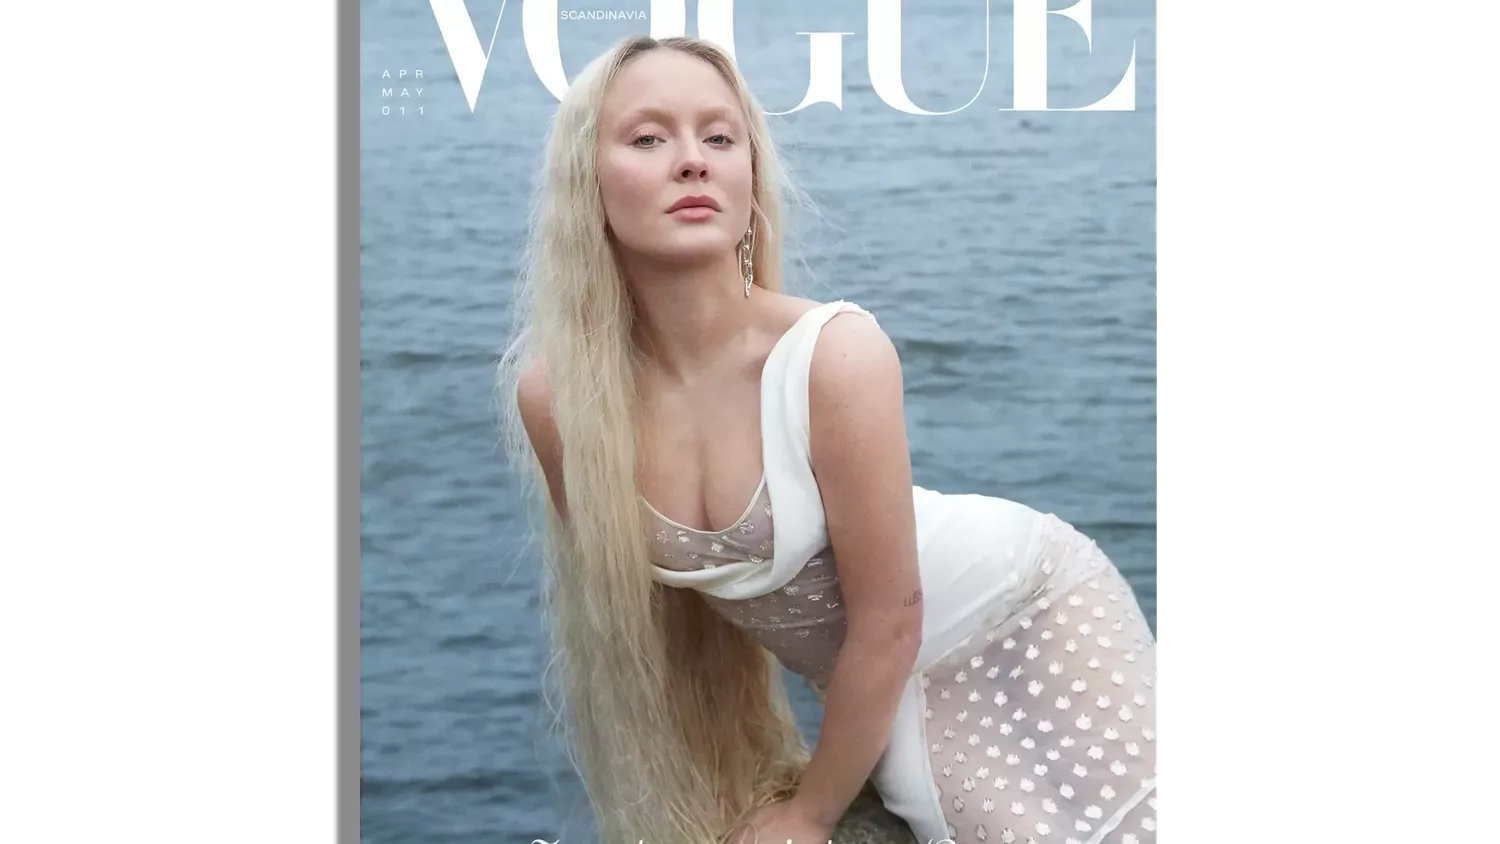 Buy Vogue Scandinavia's April-May Issue Featuring Zara Larsson 